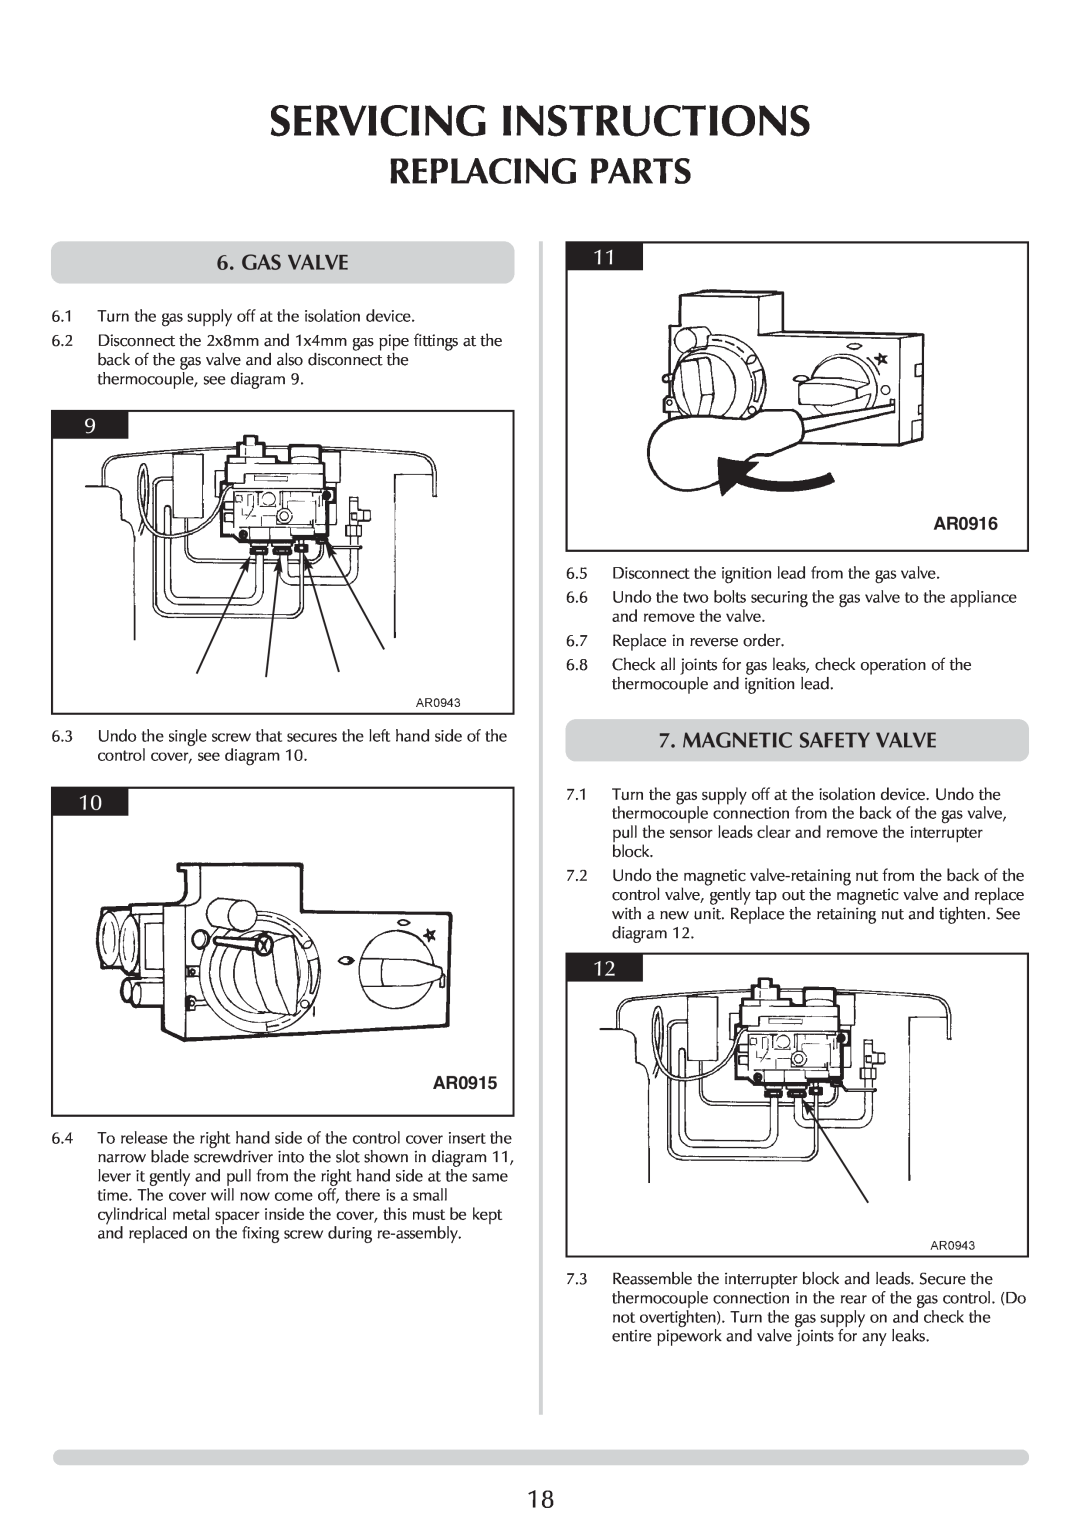 Stovax manual Servicing Instructions, Replacing Parts, Gas Valve, Magnetic Safety Valve, AR0915, AR0916 